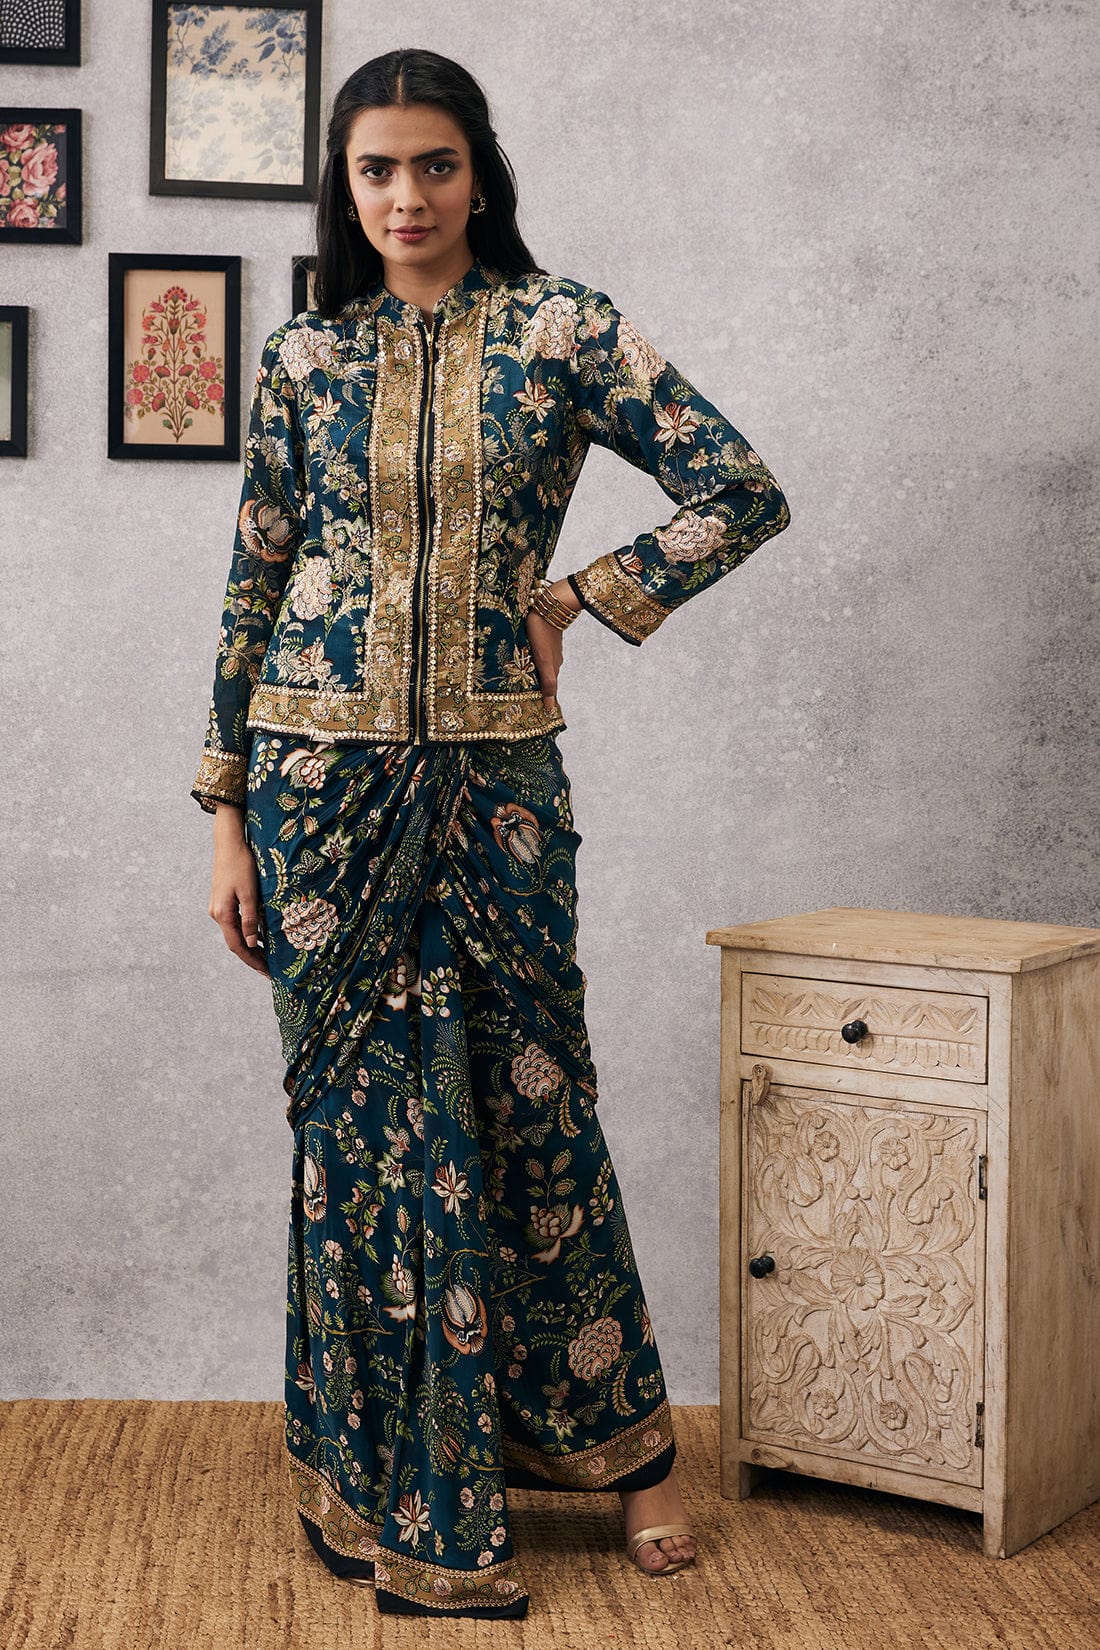 Image of The MEHR Embroidered Jacket with Drape Skirt is a unique and stylish choice for formal attire. The embroidery proudly displays intricate designs along the entire jacket and skirt, crafted from quality fabrics for a flattering, yet comfortable fit. The drape skirt adds an extra layer of elegance while still remaining lightweight and breathable for any occasion.  From savoirfashions.com